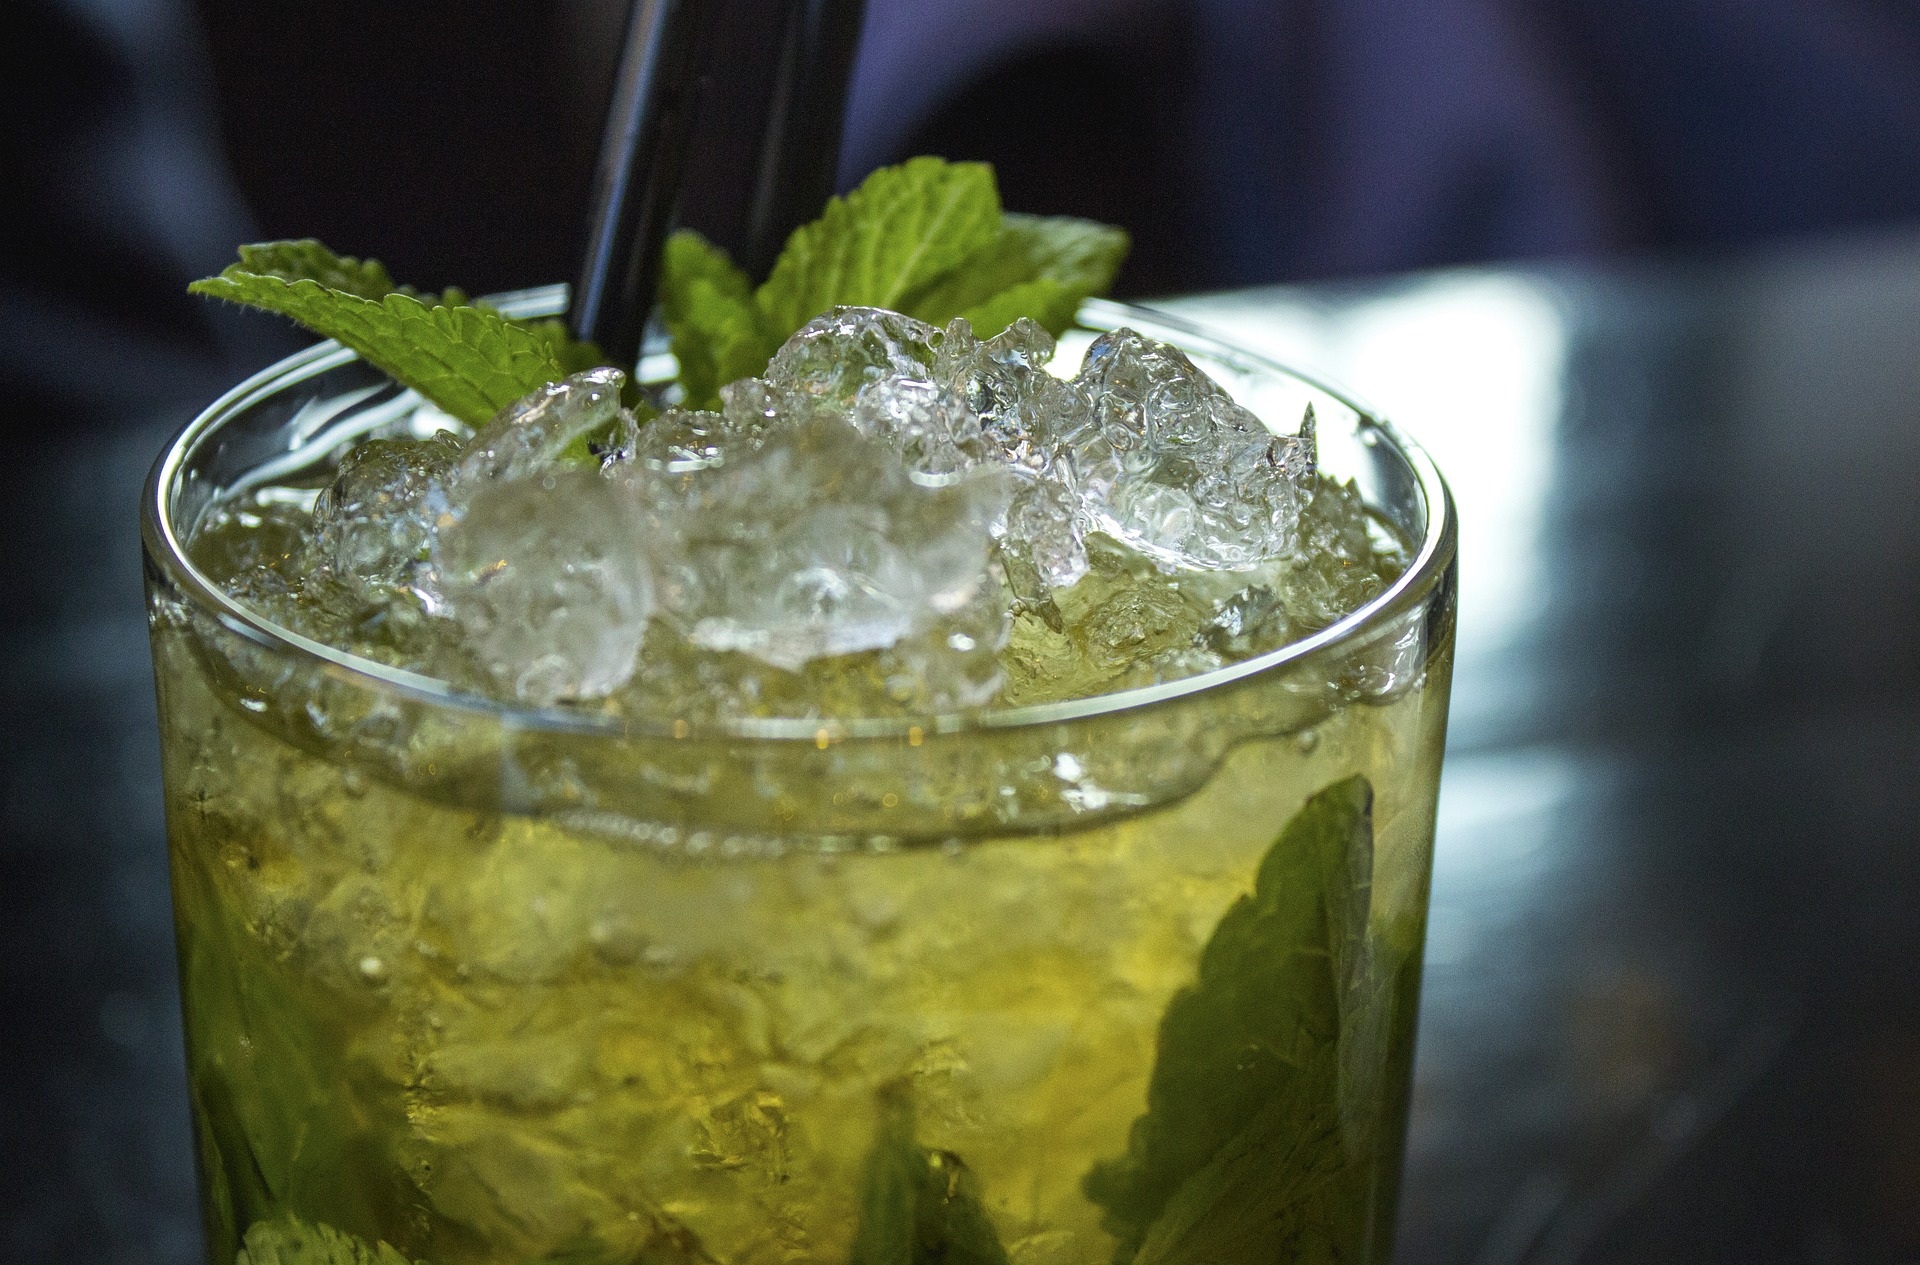 The mojito is one of the most popular rum mixed drinks.